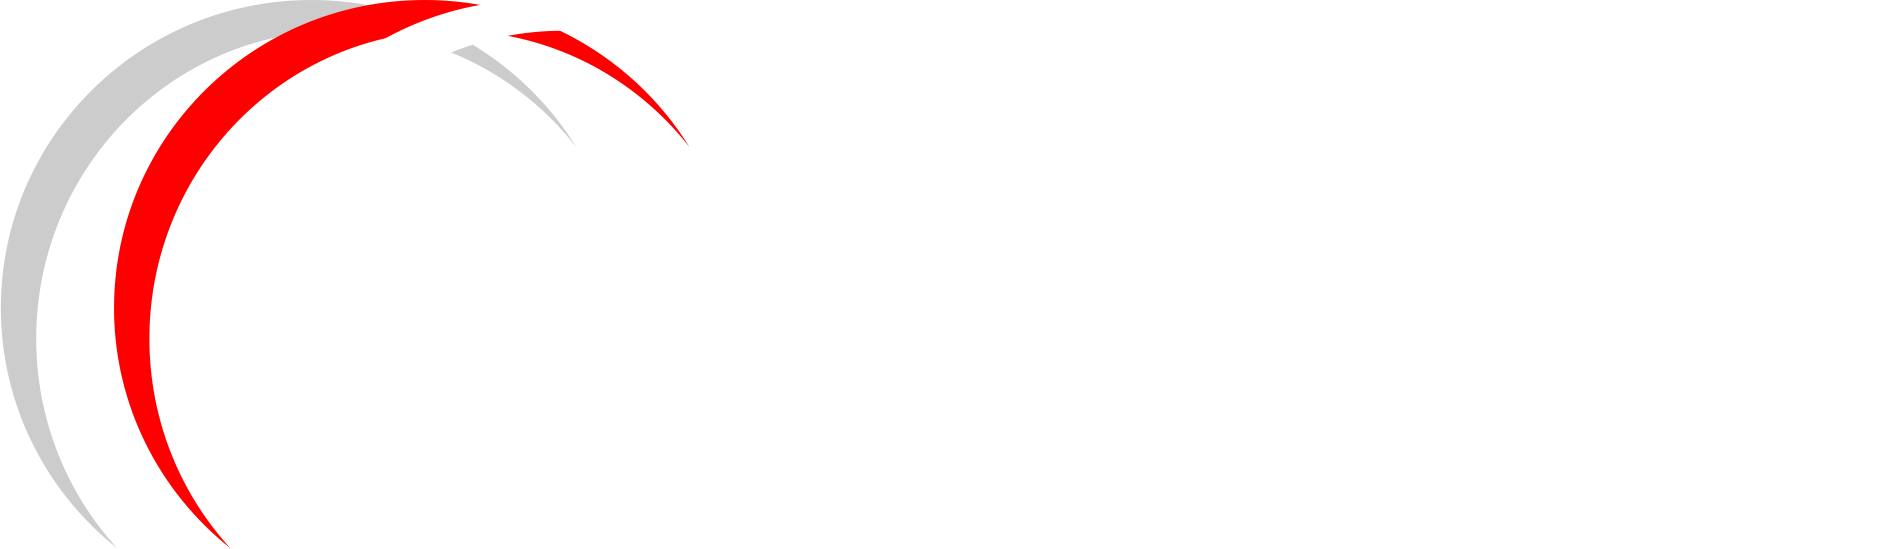 Microtech Institute for Import Export Amazon eBay Alibaba Graphic Computer Course Training Coaching Diploma in Sialkot